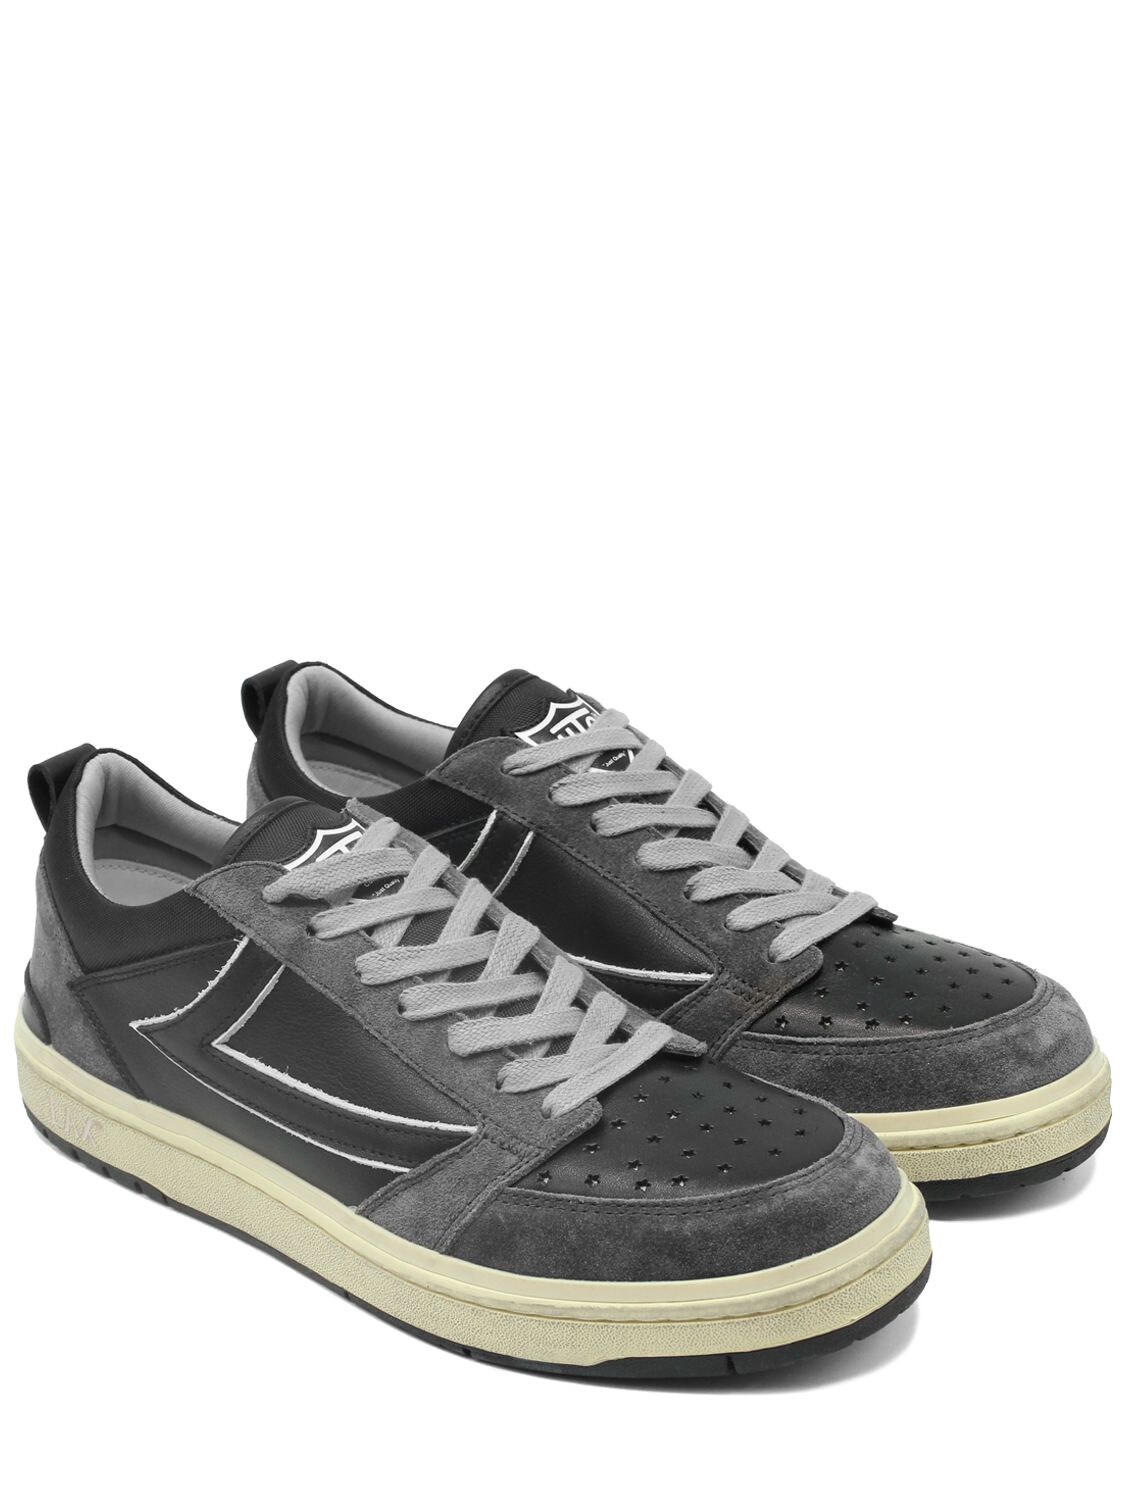 Shop Htc Los Angeles Starlight Leather Low Top Sneakers In Black,grey